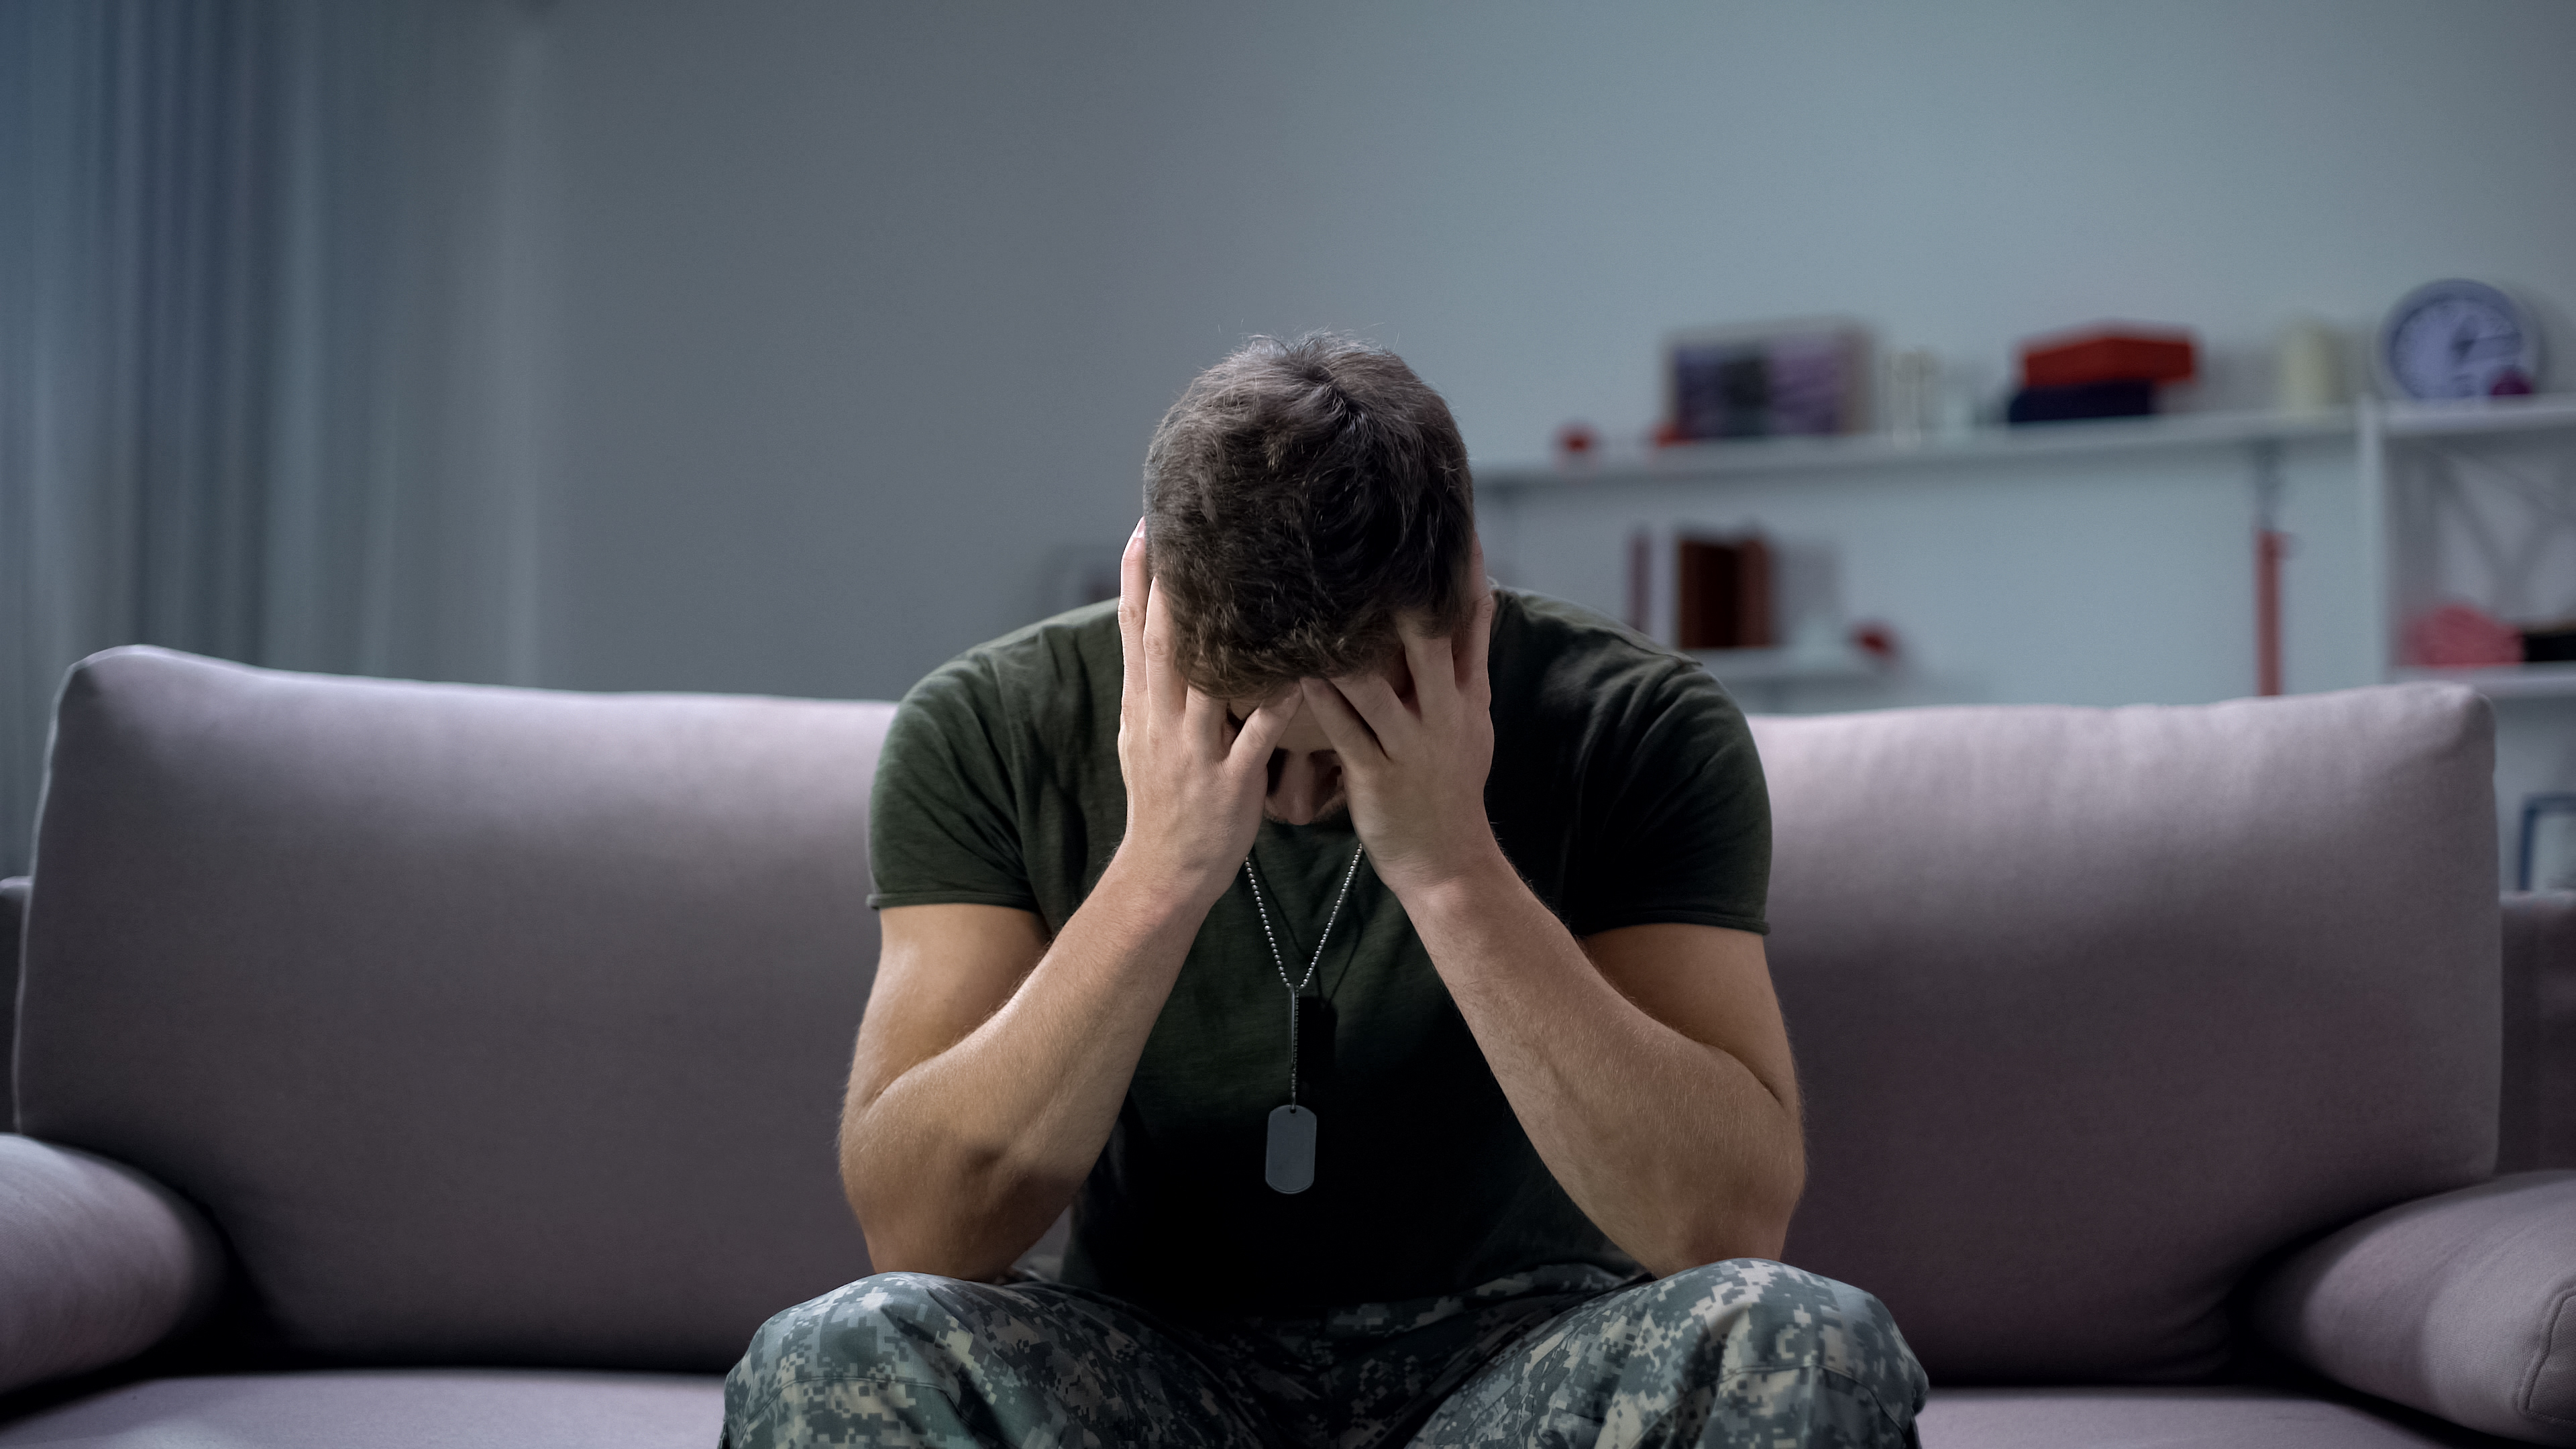 Working with Patients Coping With PTSD